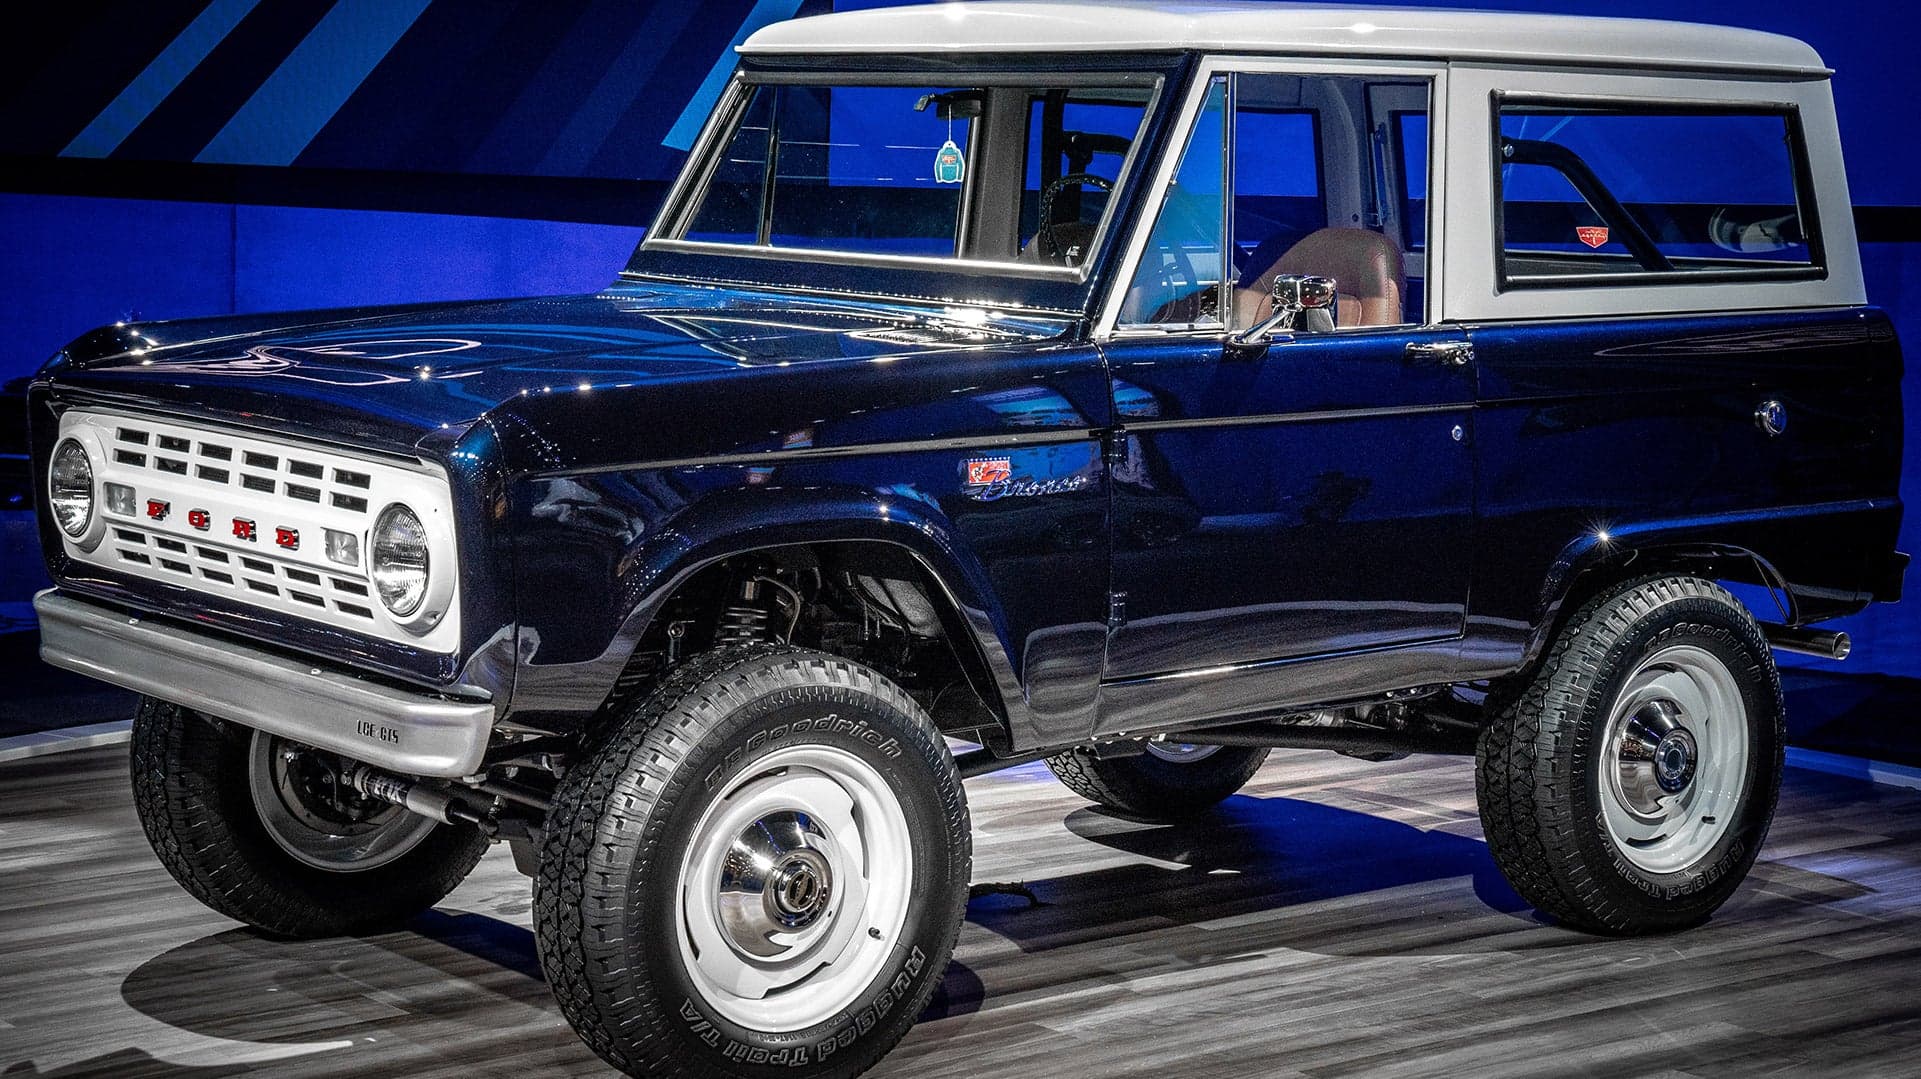 Jay Leno’s 1968 Ford Bronco Is Powered by a Shelby GT500 Supercharged V8 Engine